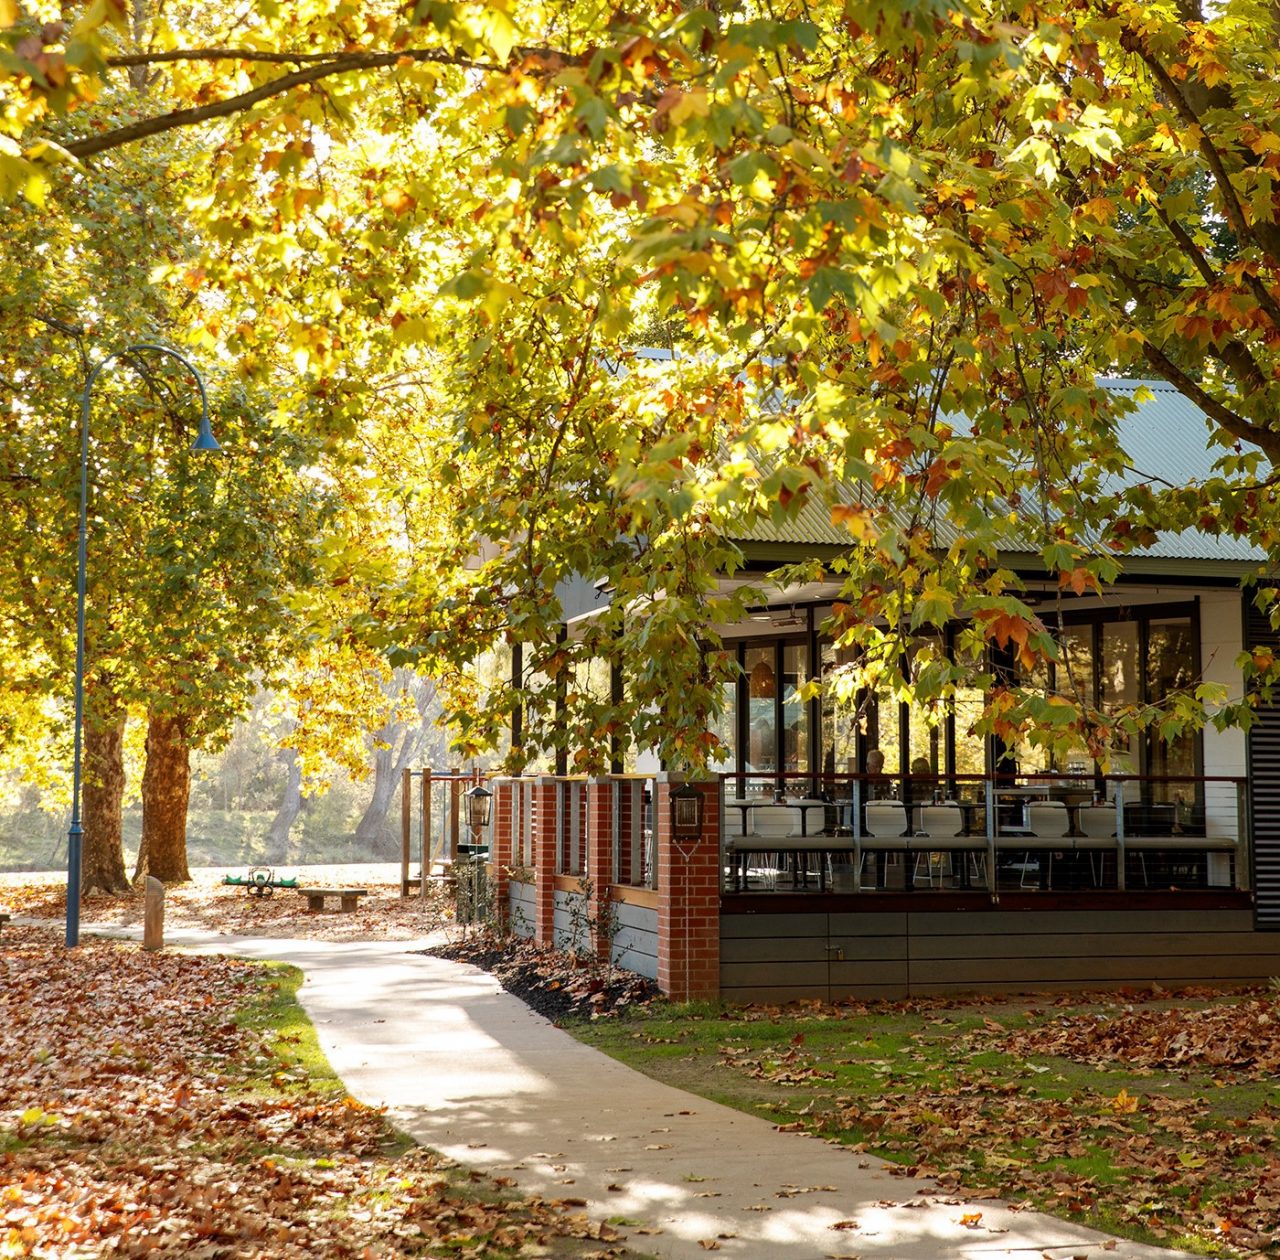 Autumn leaves in Noreuil Park Foreshore and The River Deck cafe, Albury.